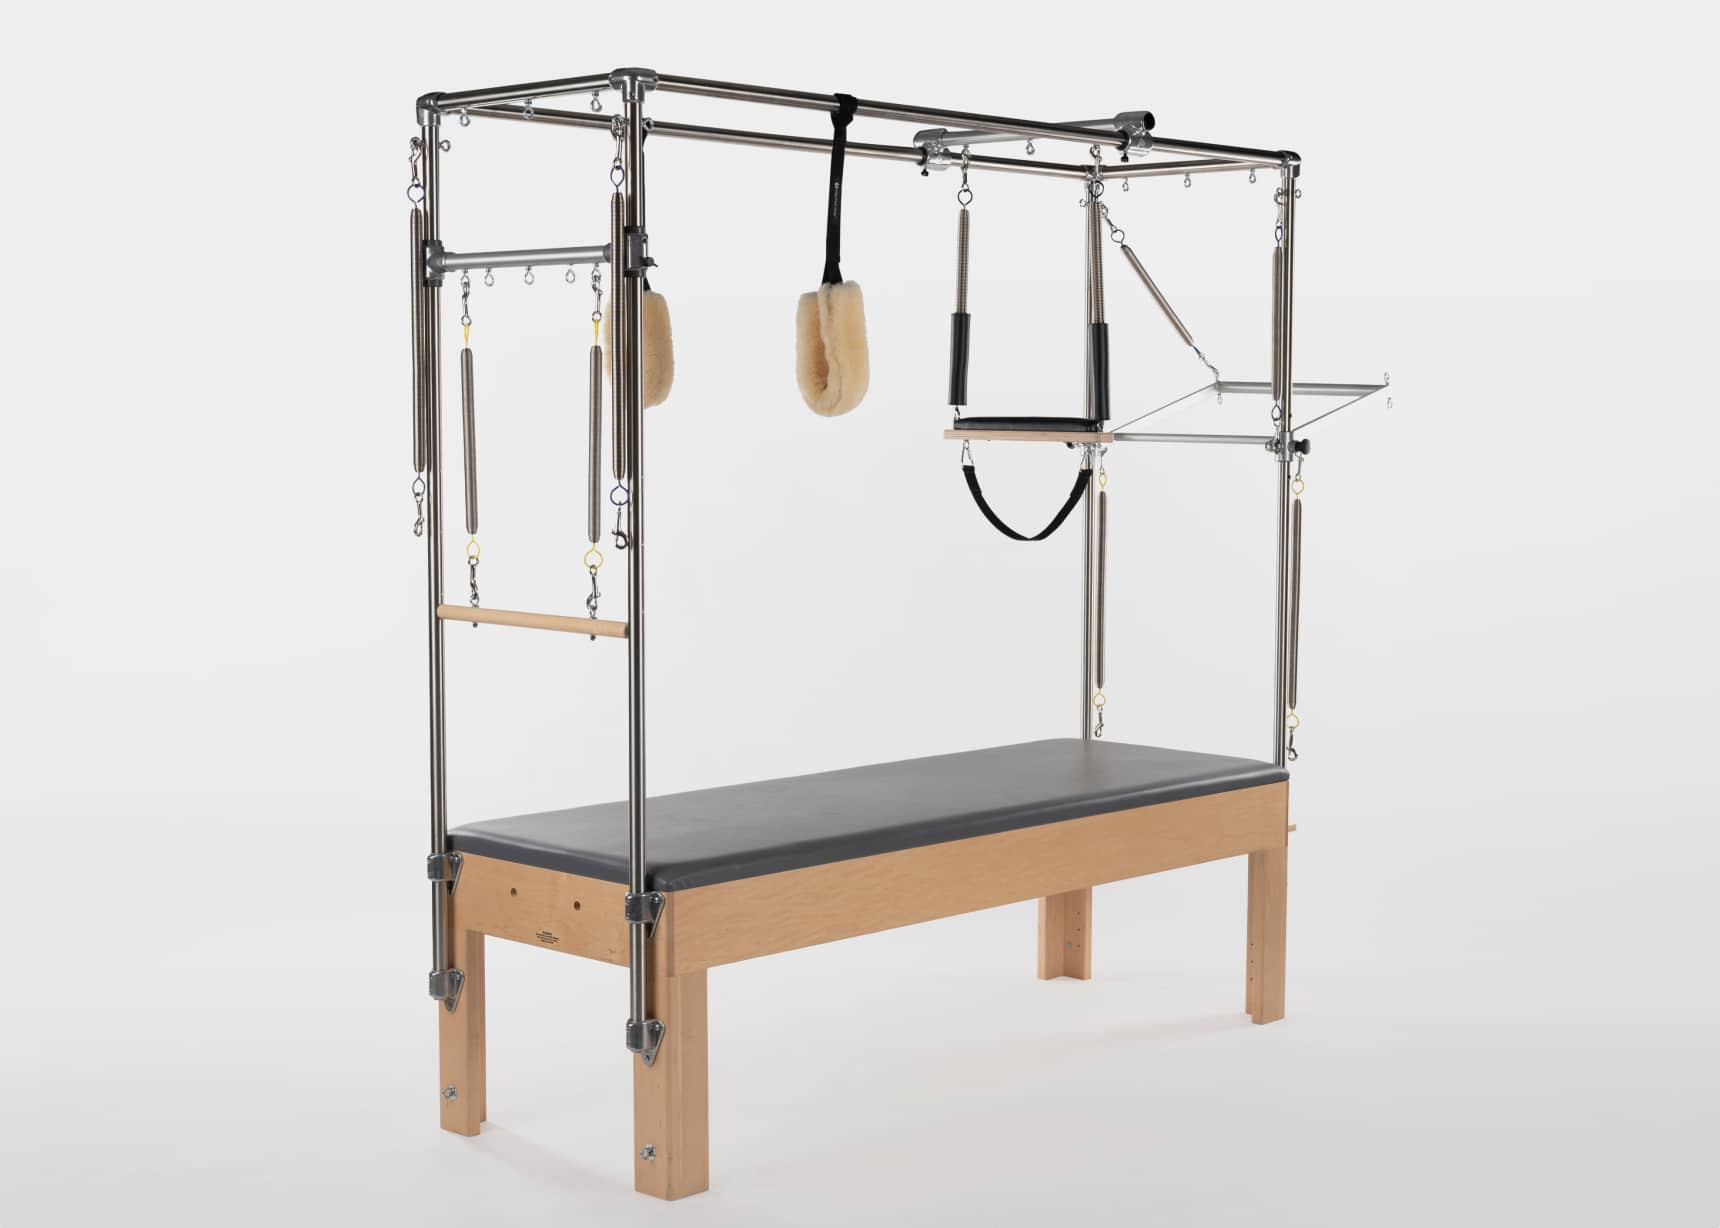 Pilates Cadillac - Trapeze Table - Pilates Reformer Tower